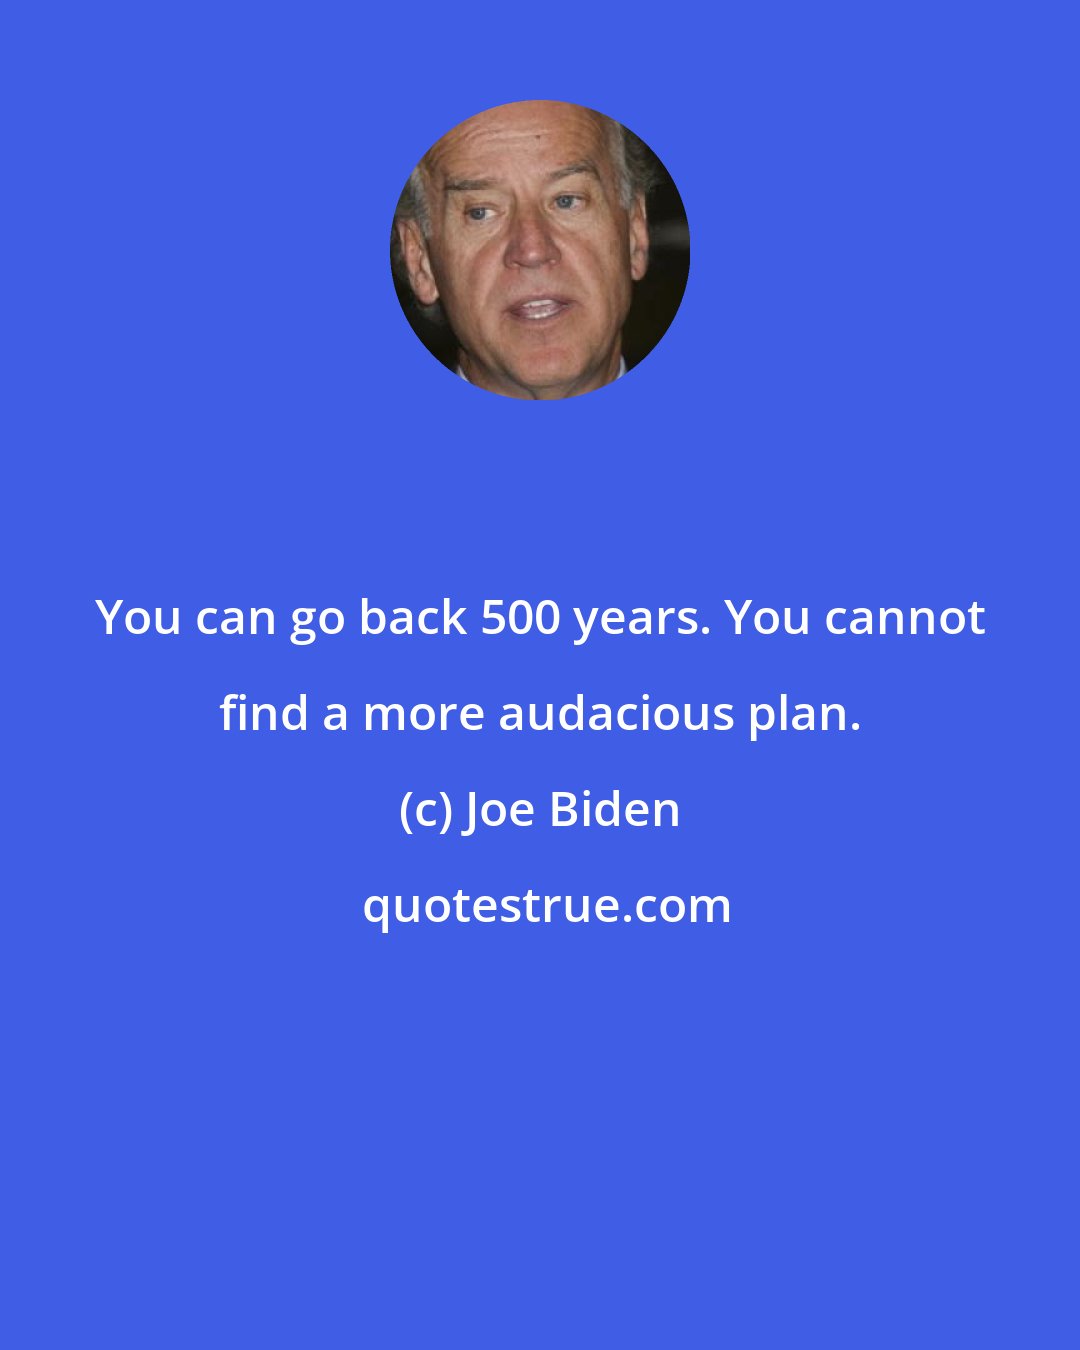 Joe Biden: You can go back 500 years. You cannot find a more audacious plan.